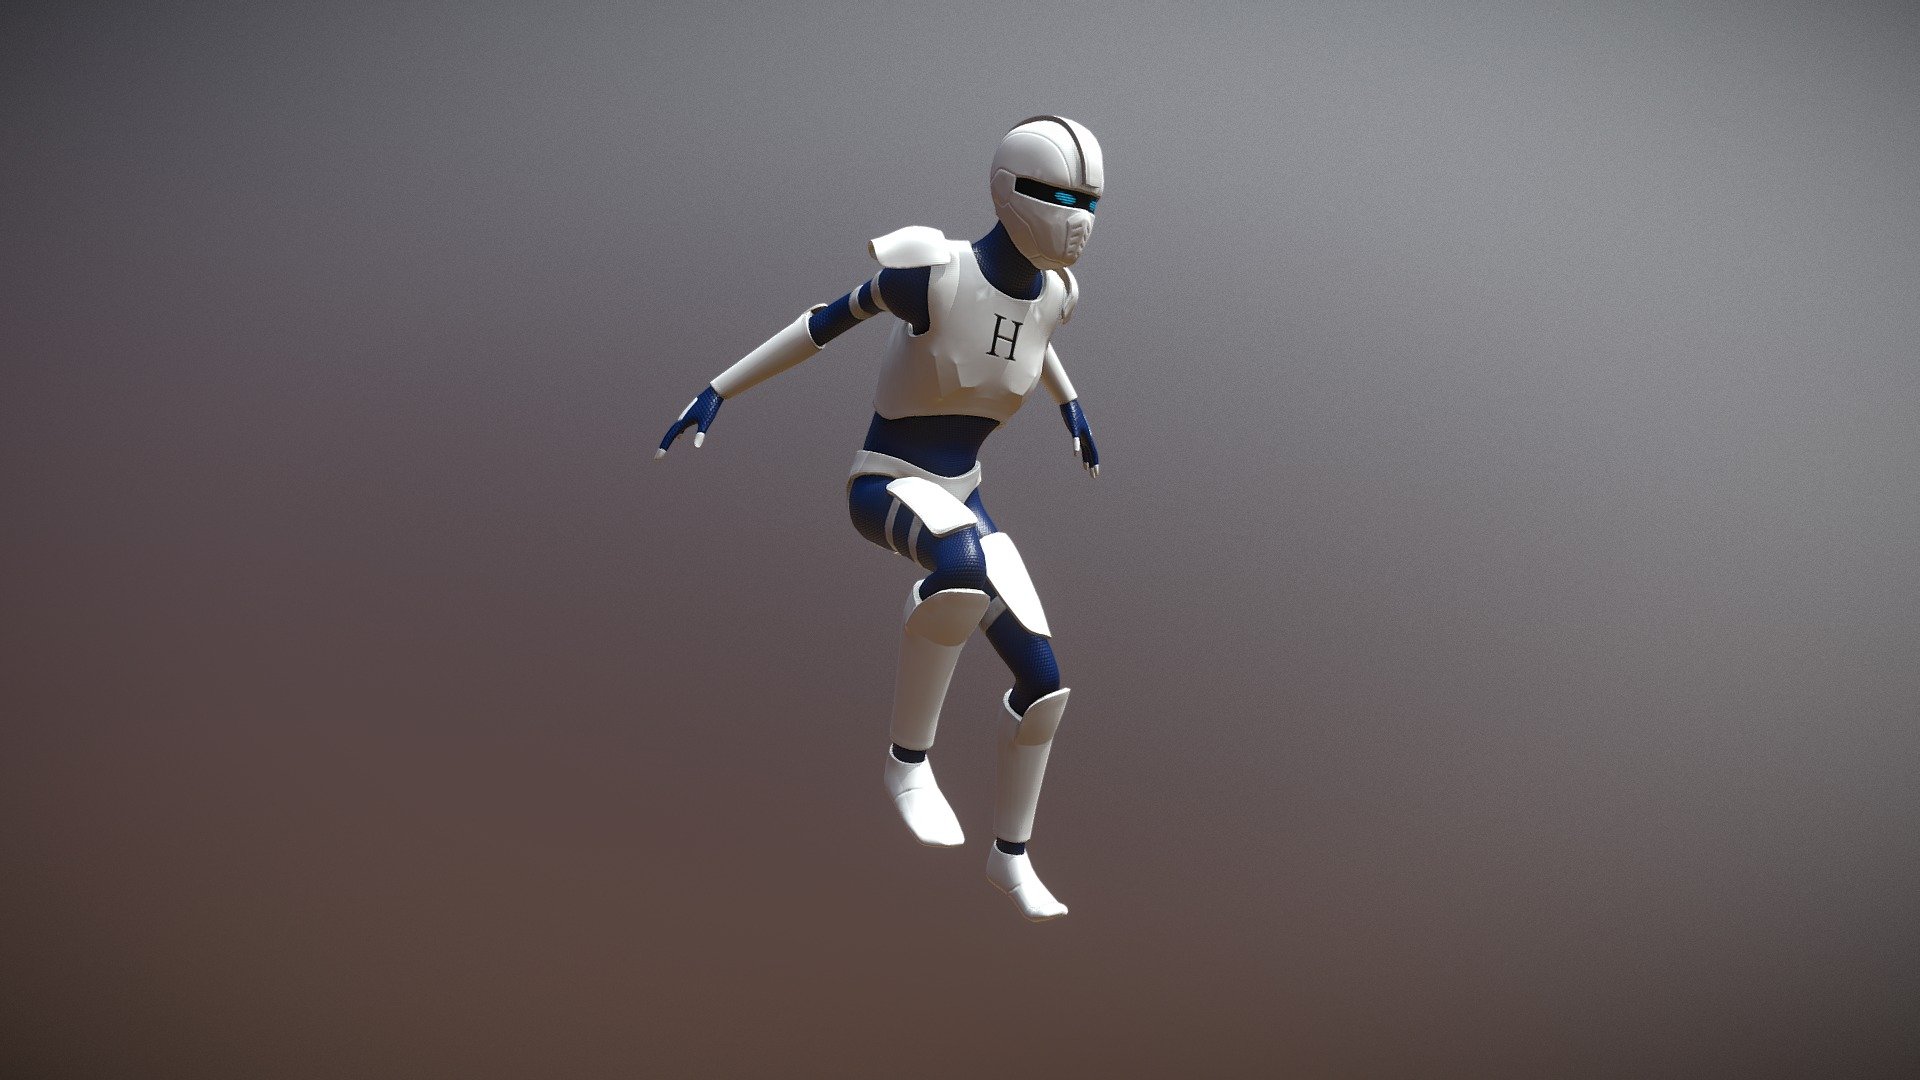 Another character for my project (along with Biomancer who is getting rework now) - Hydrogen - 3D model by Lemniscata 3d model